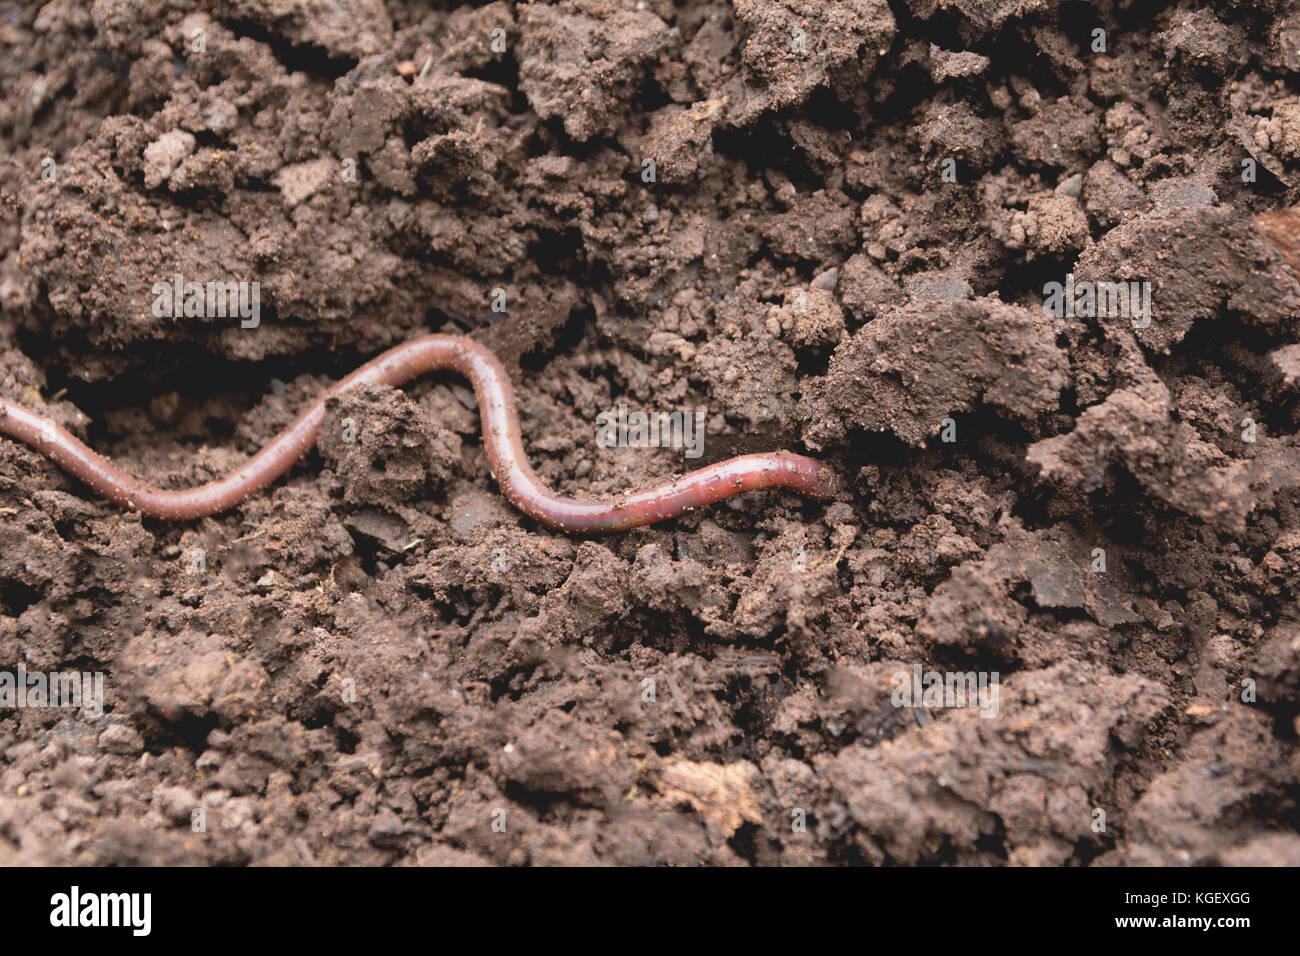 An earthworm on a soil. Earthworm and healthier soil that suitable for planting Stock Photo